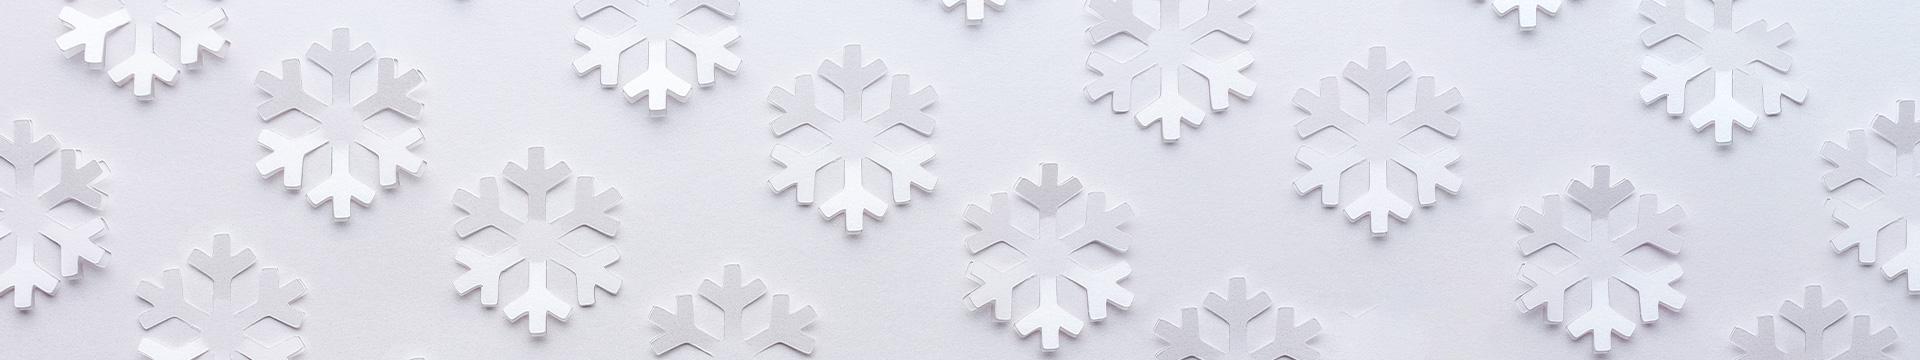 A photo of snowflakes made out of paper. 